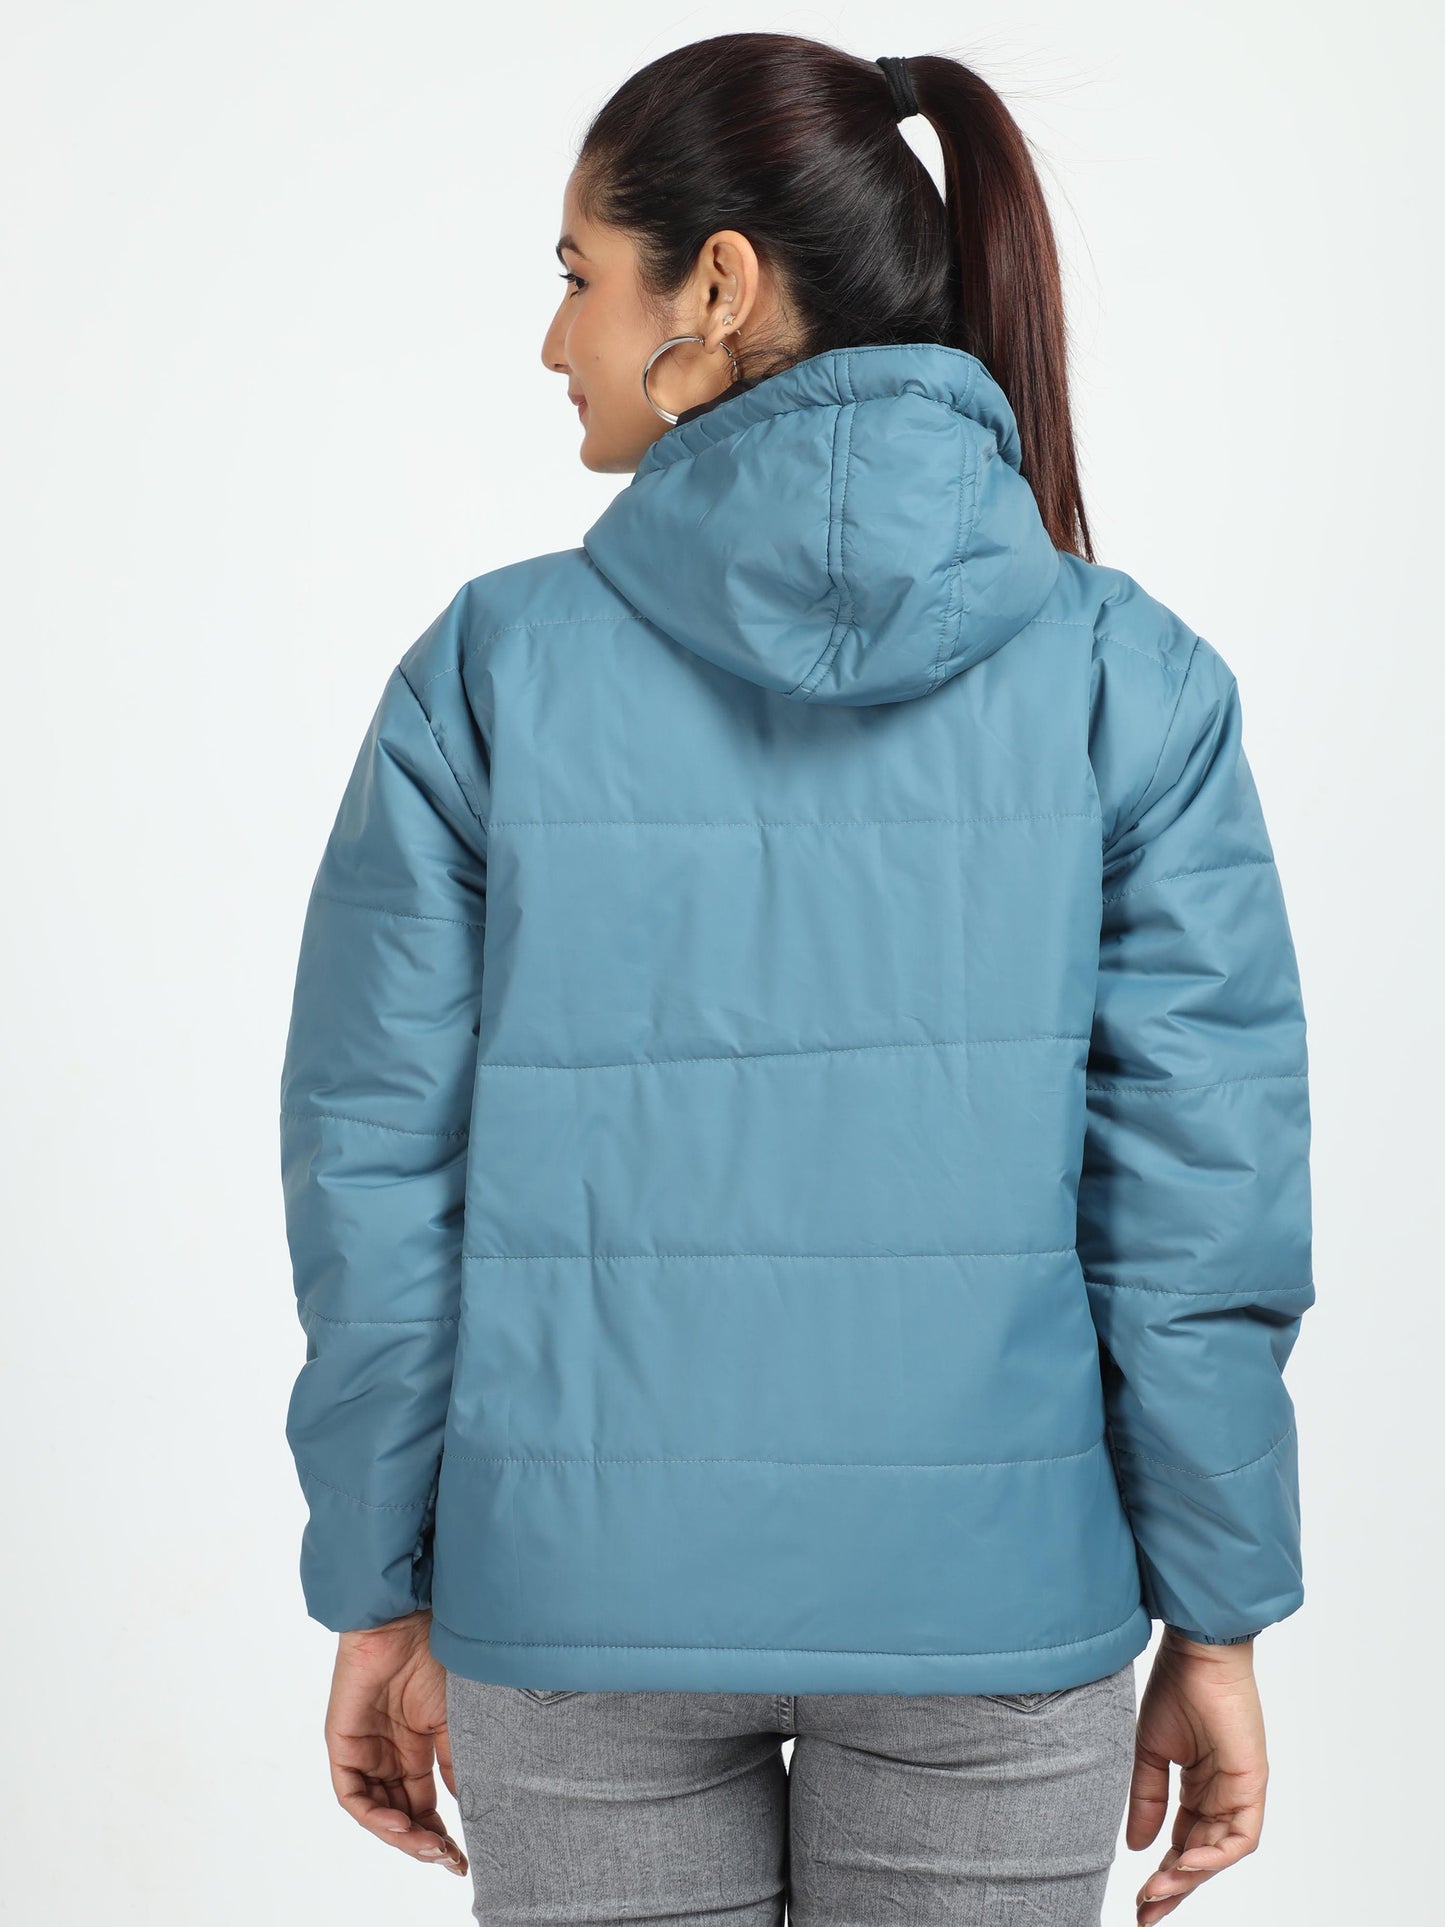 Women Air Force Blue Bomber Jacket with Hood